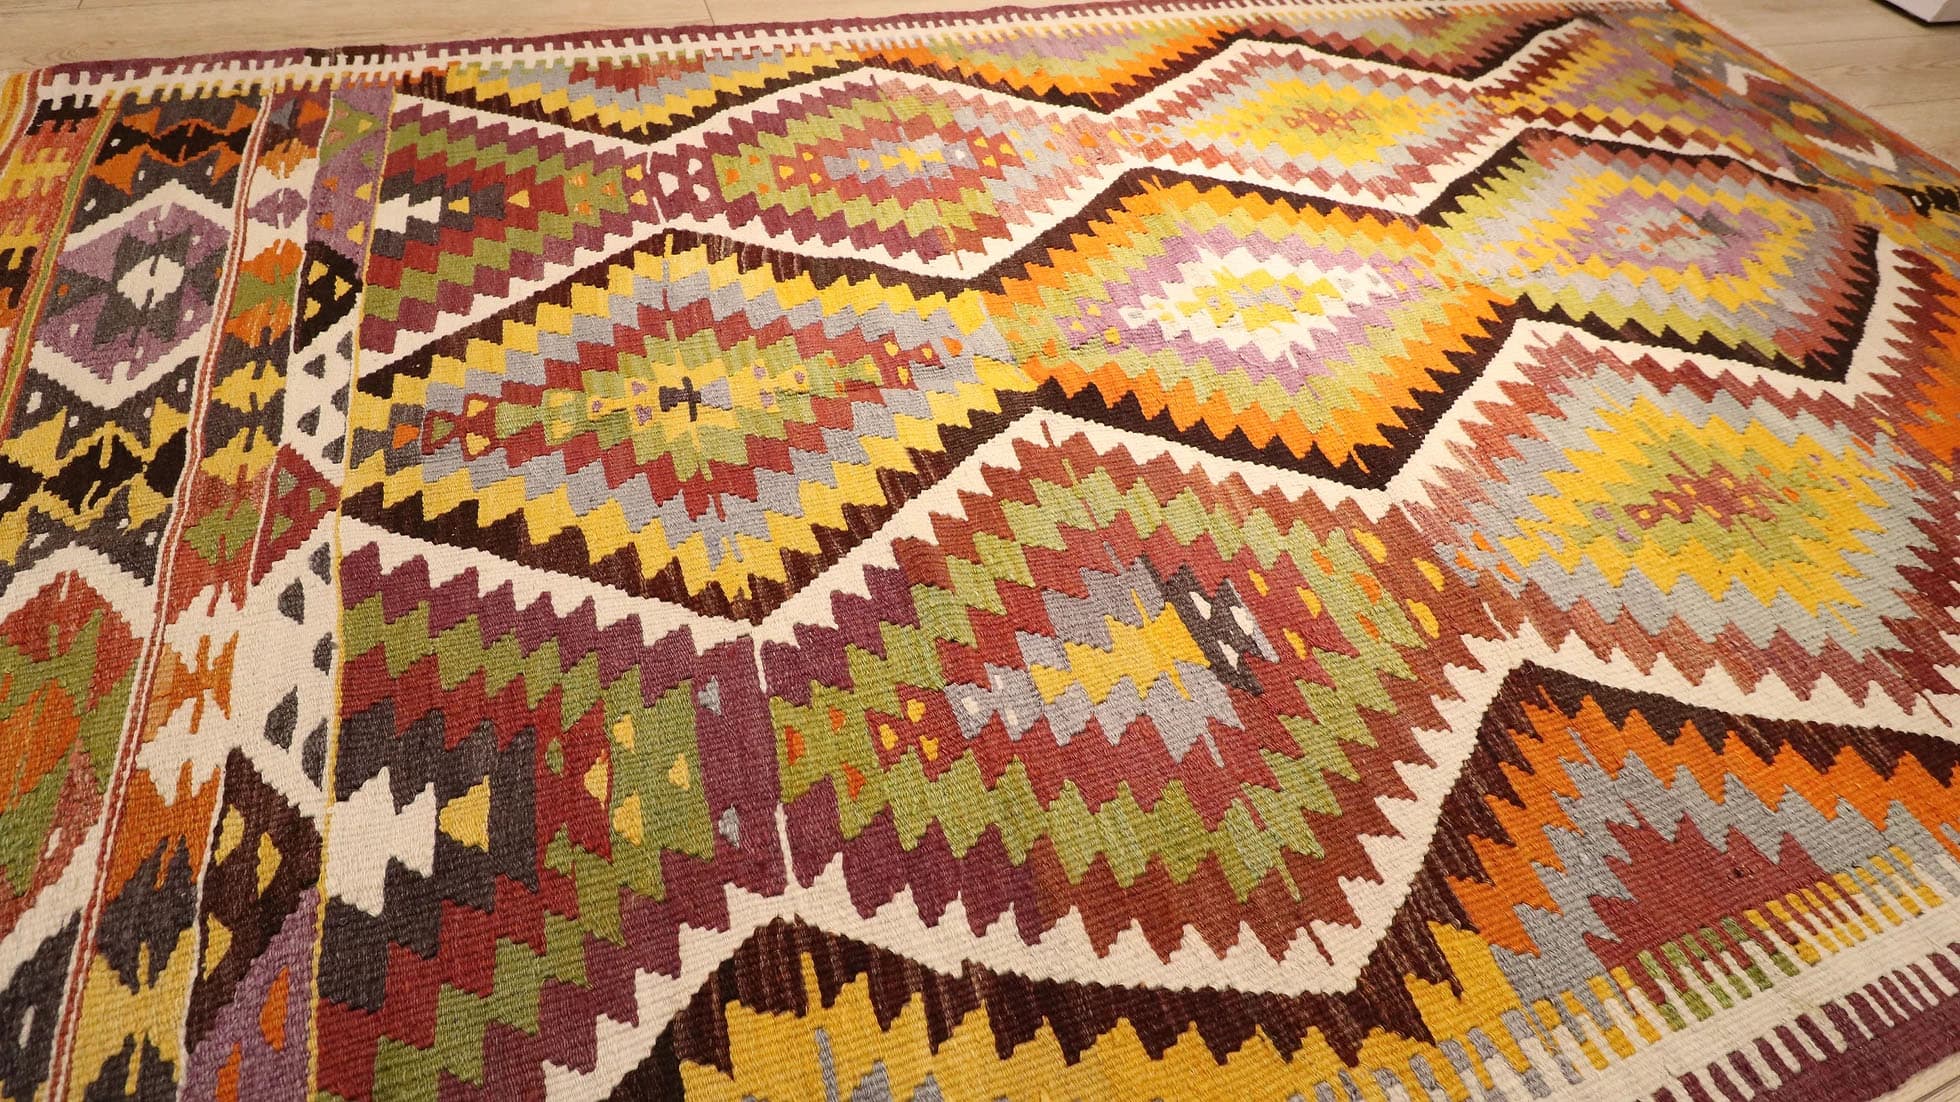 a magnificent Turkish rustic kilim rug in muted pastel tones and tribal patterns by Kilim Couture New York rug showroom 